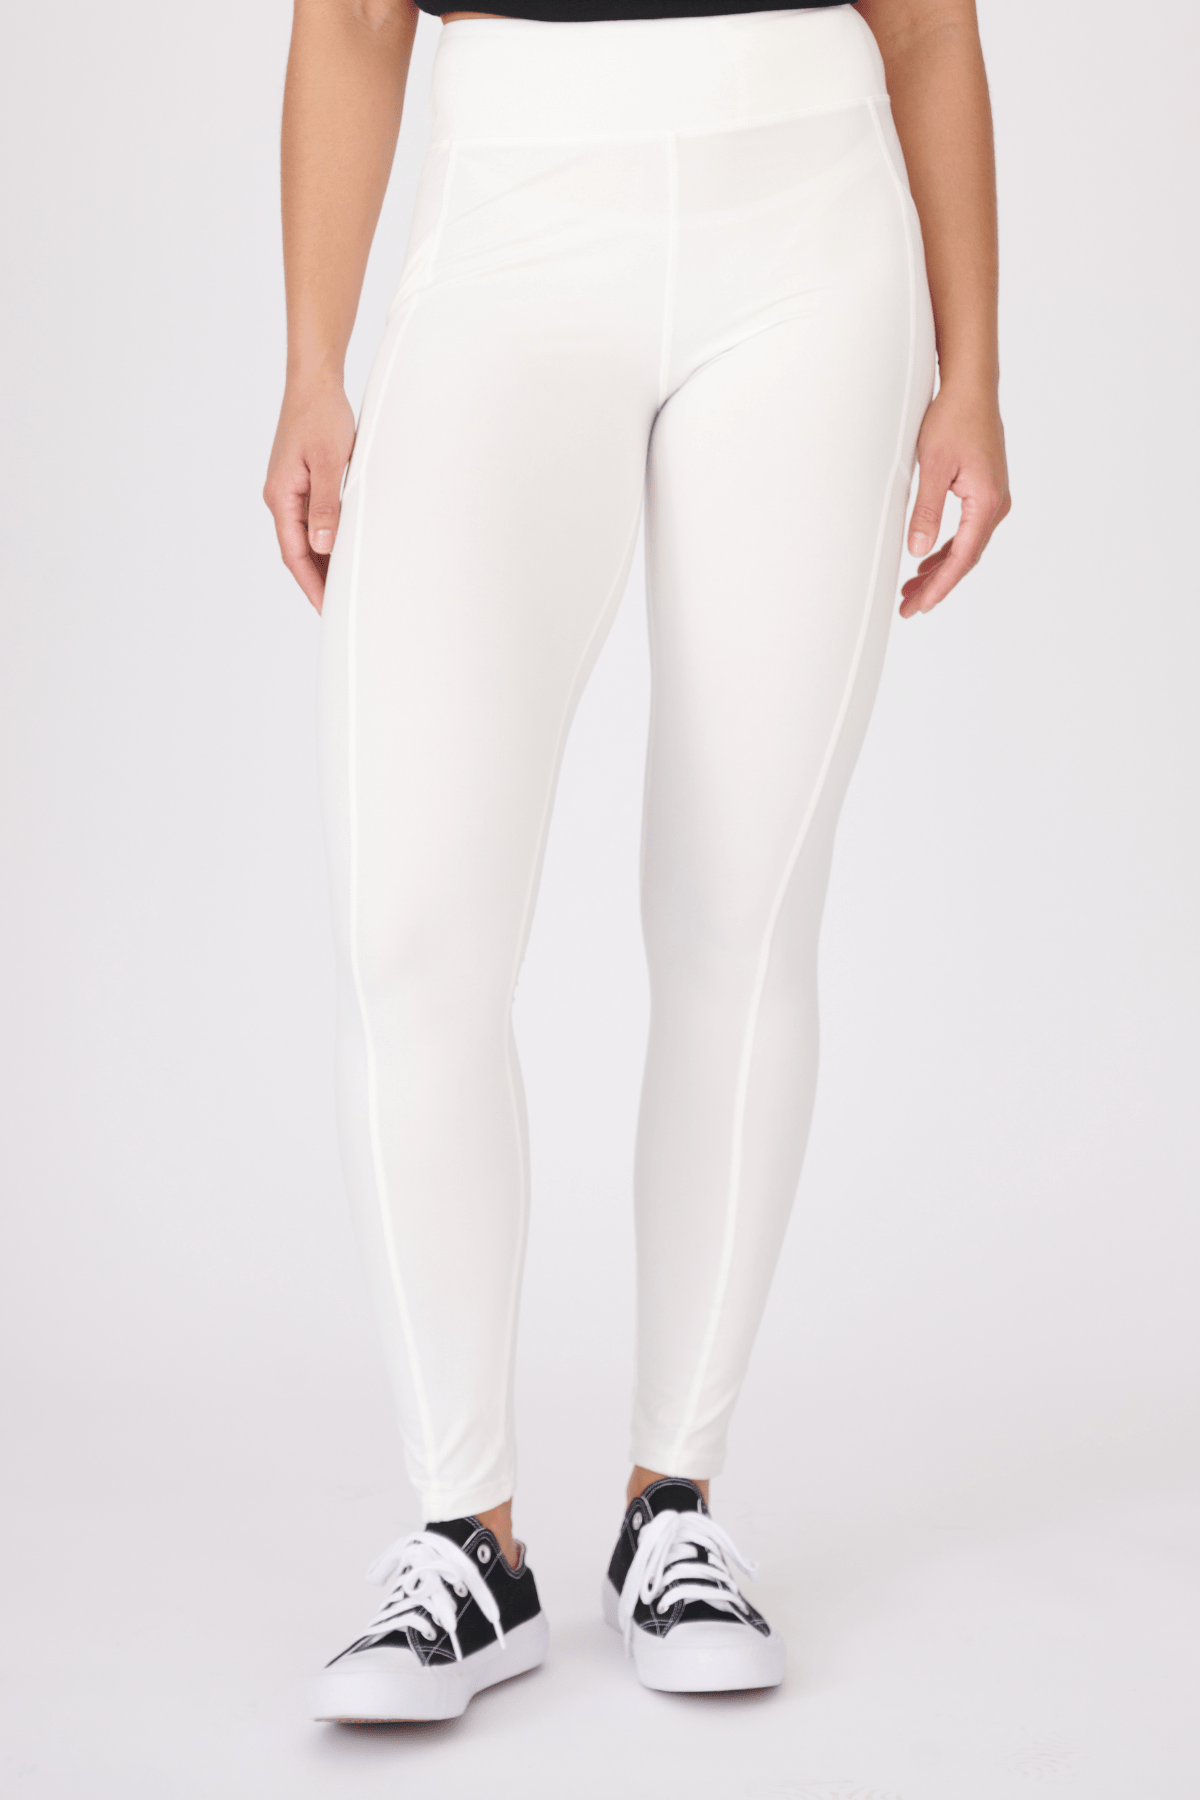 oolala Leggings Solid White with Pockets 🦋 oolala ButterflySoft™ | Solid White with Pockets Women's Leggings